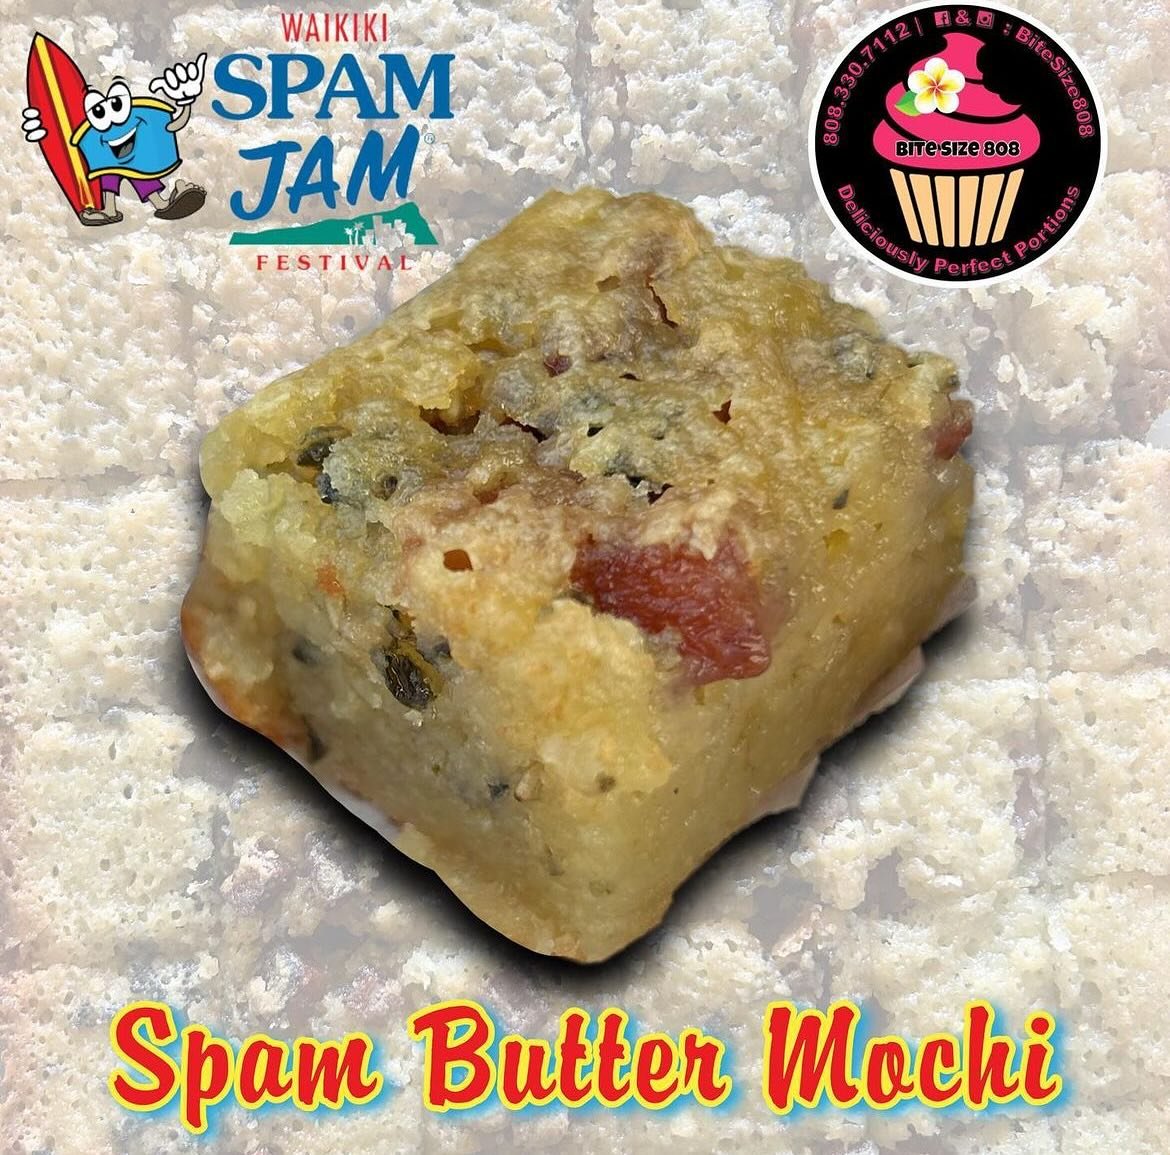 SPAM Butter Mochi at @bitesize808! Find this and many other sweet creations on Saturday.